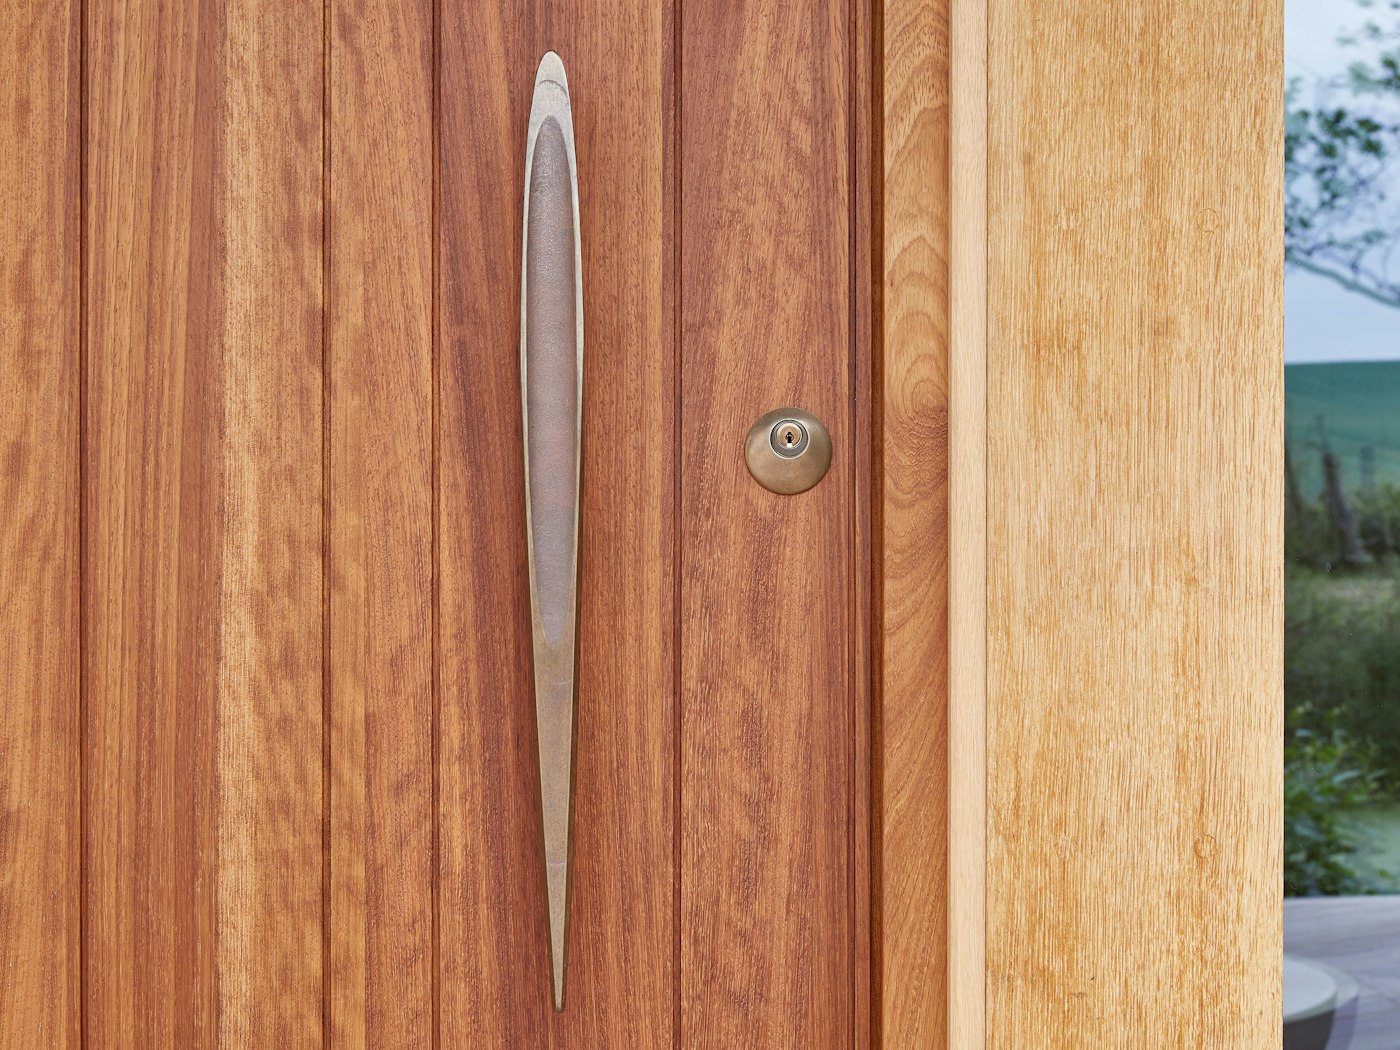 Our bronze pull handle finishes the look